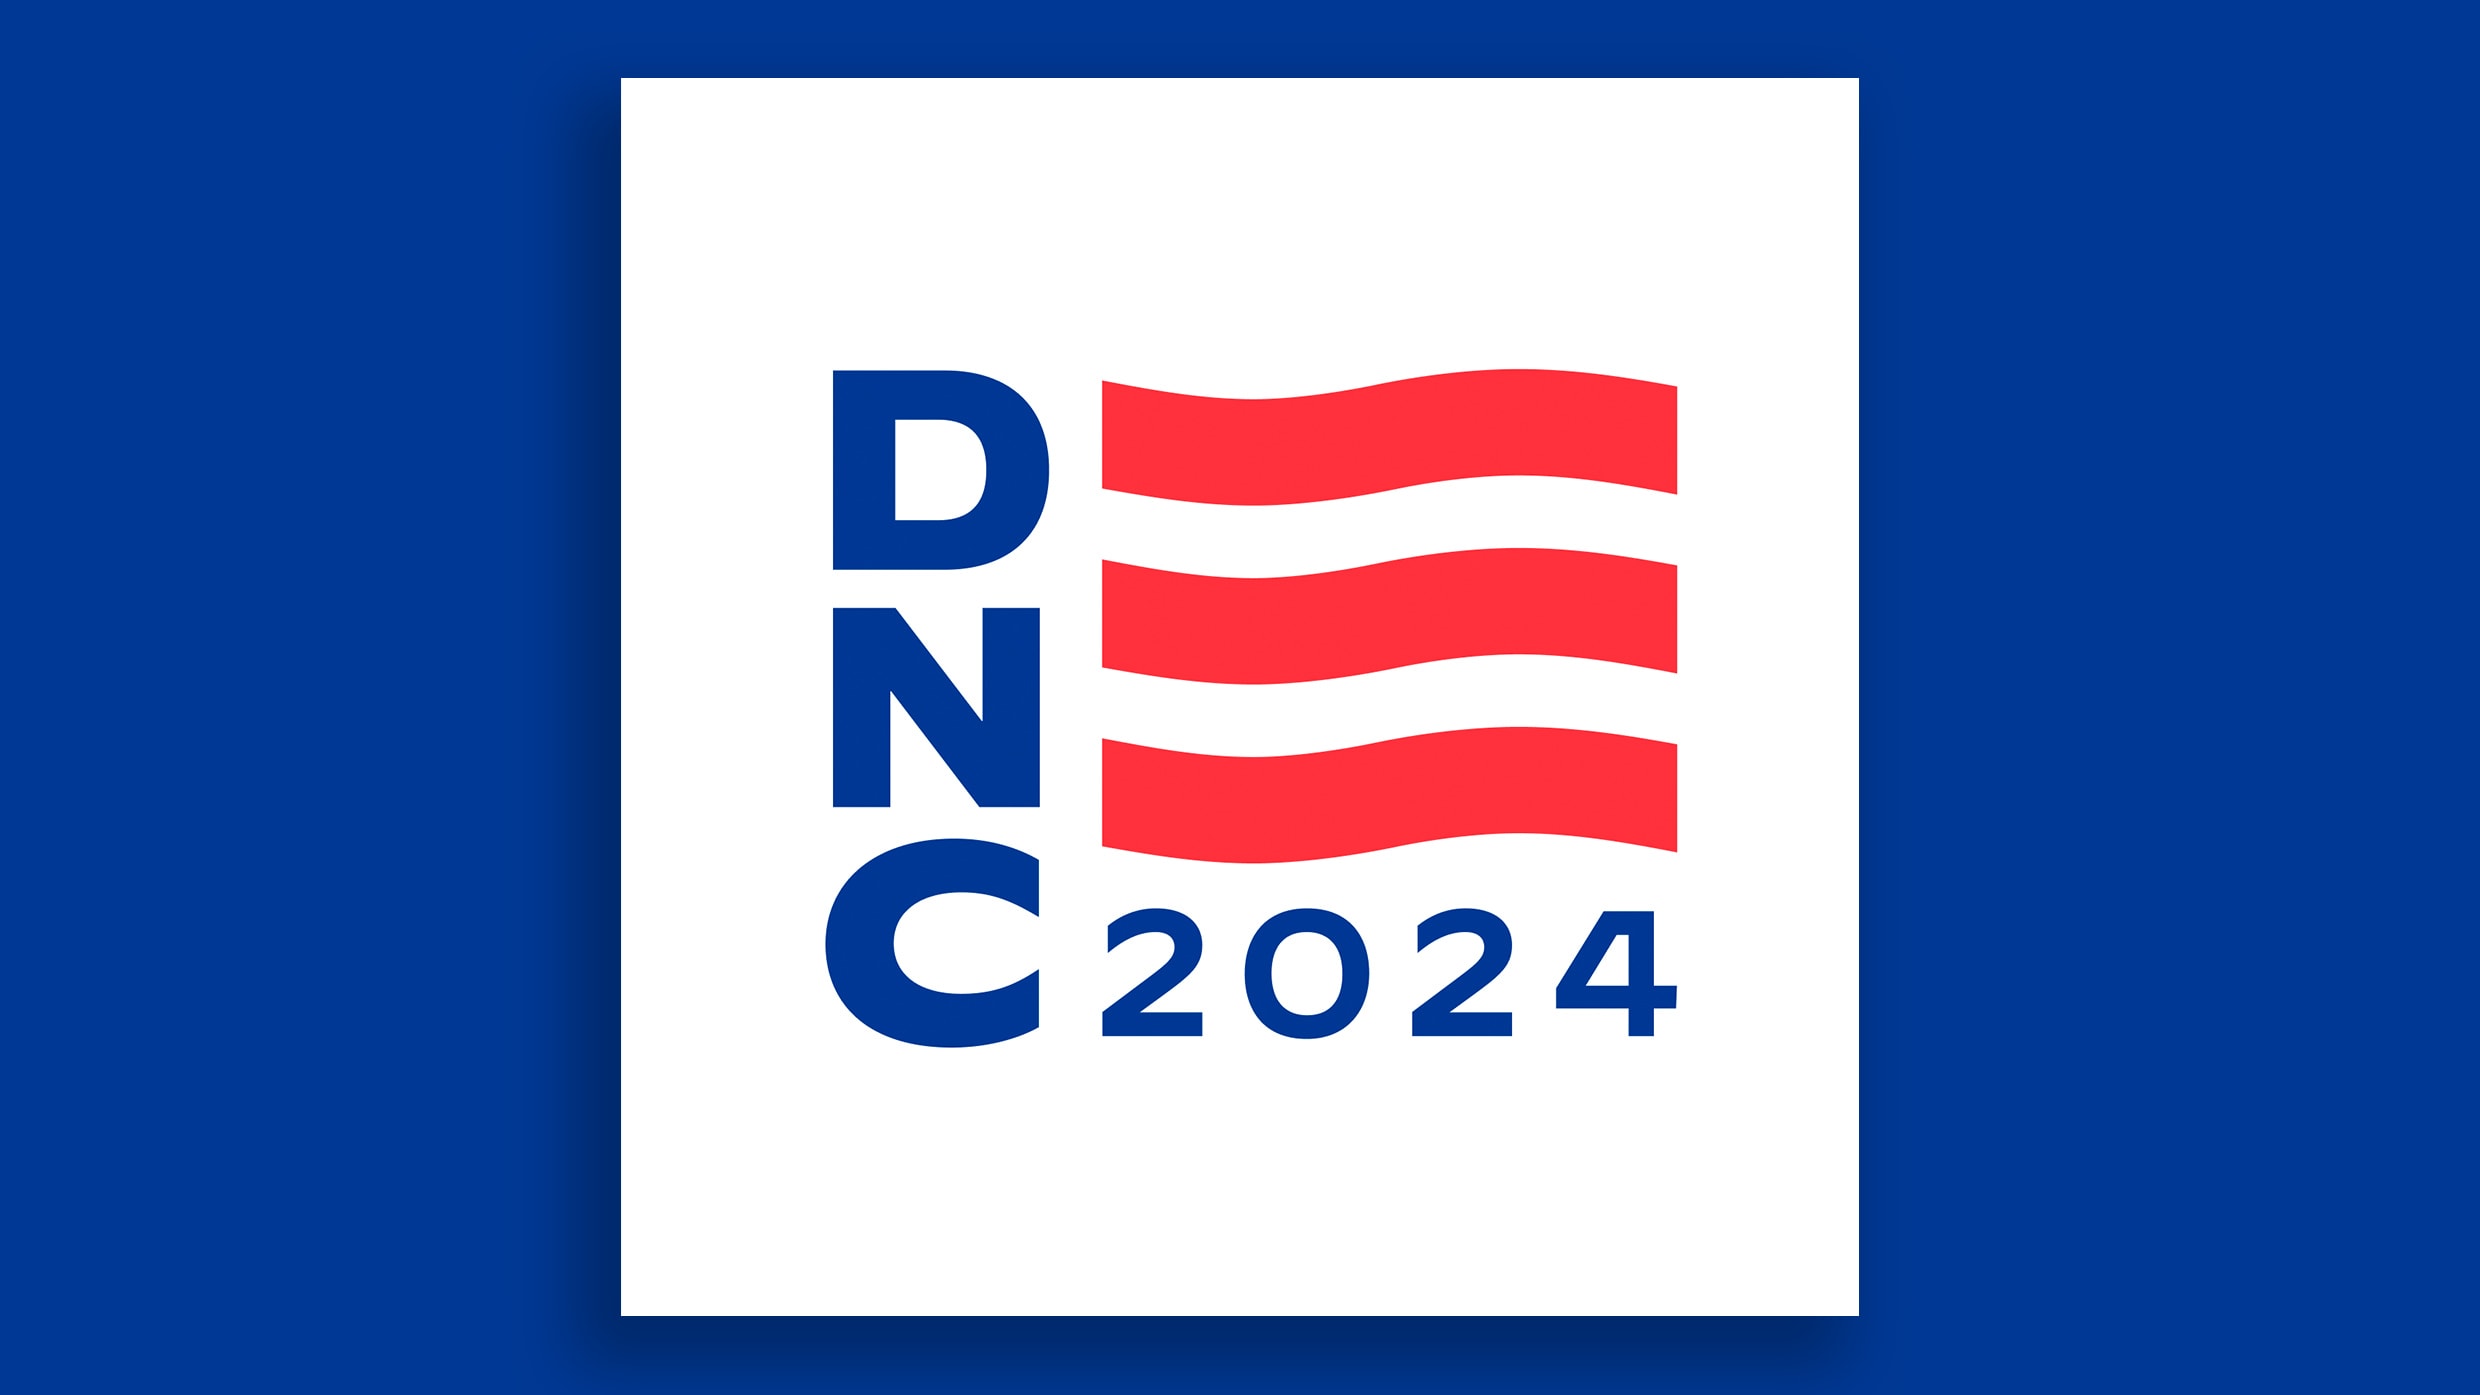 What the DNC 2024 logo reveals about Democrats' strategy